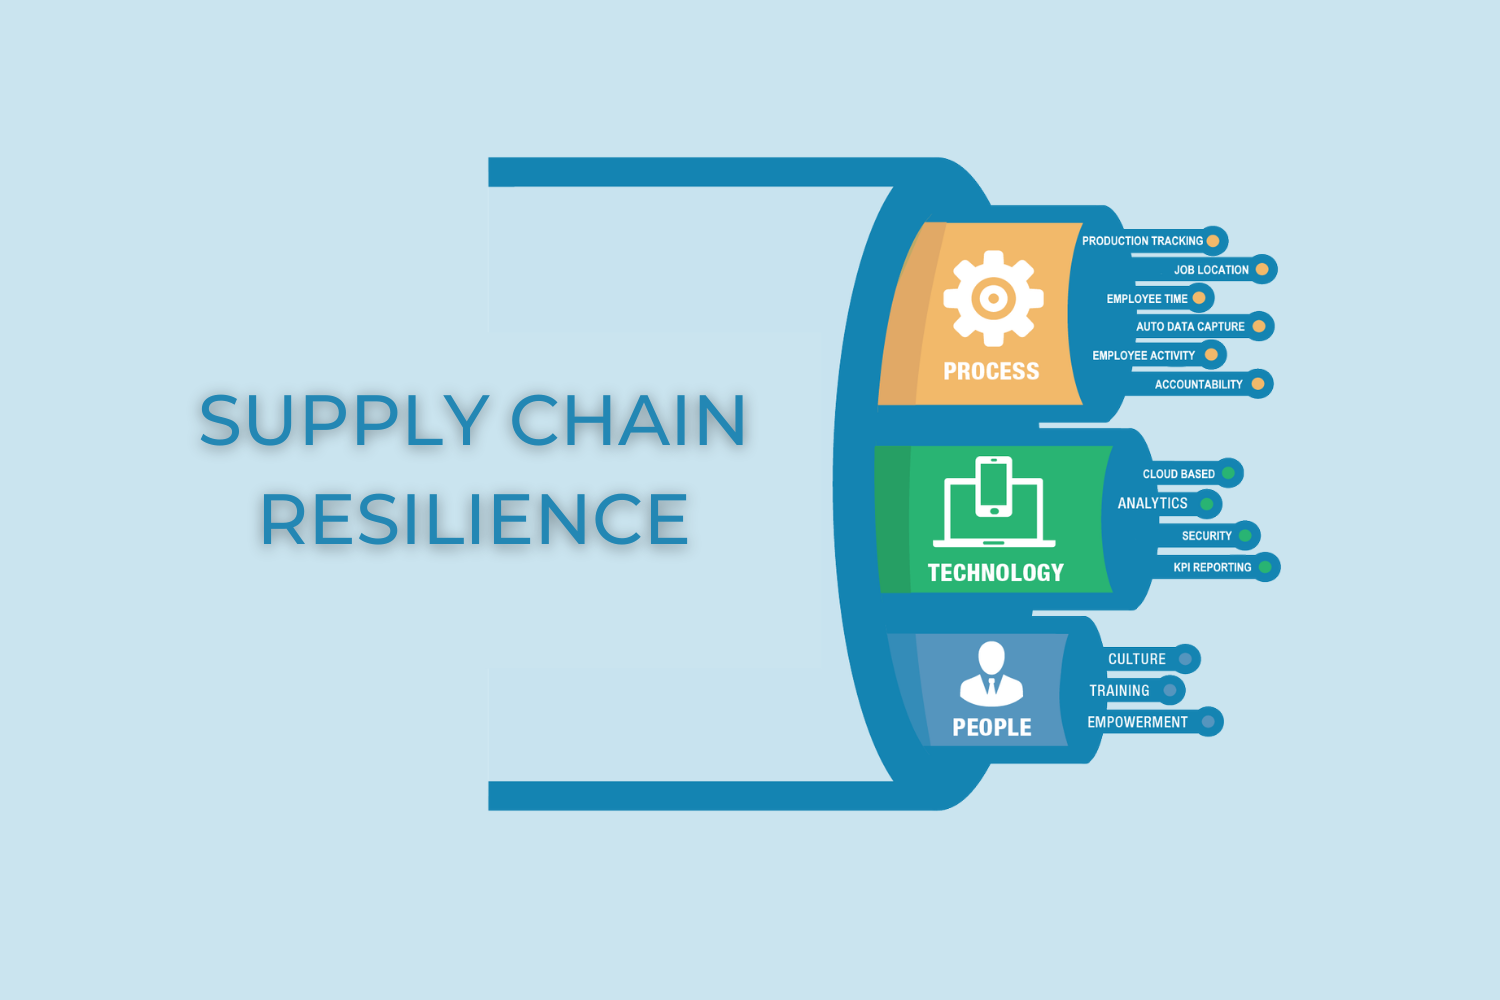 supply chain resilience case study pdf